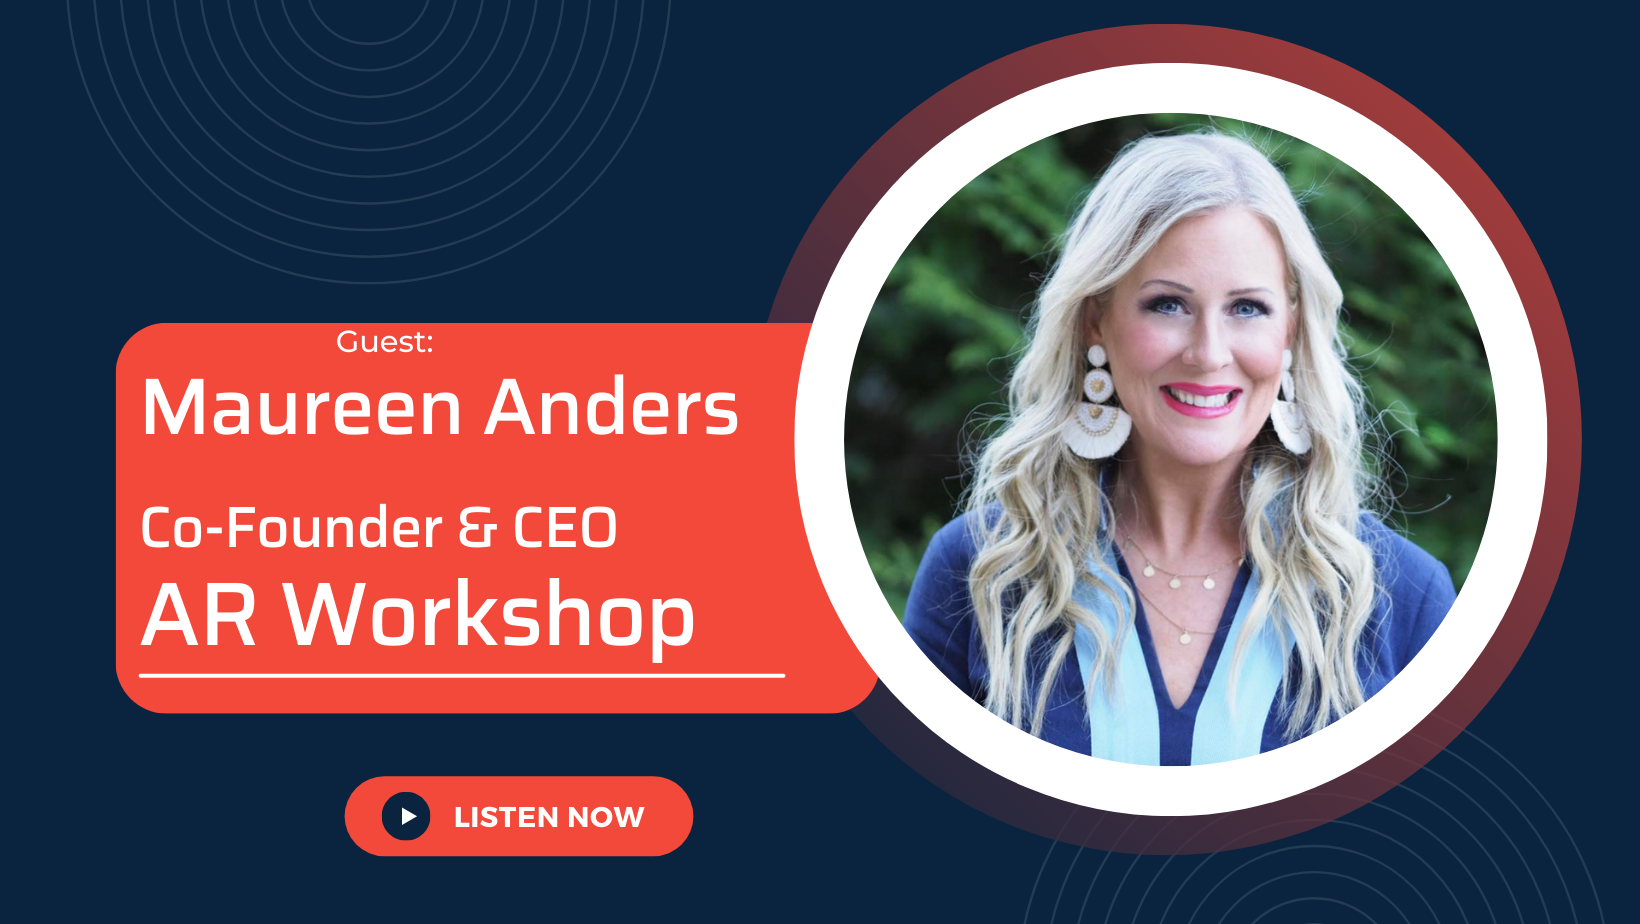 How To Grow Your Brick-And-Mortar Business with the Co-Founder & CEO of AR Workshop, Maureen Anders